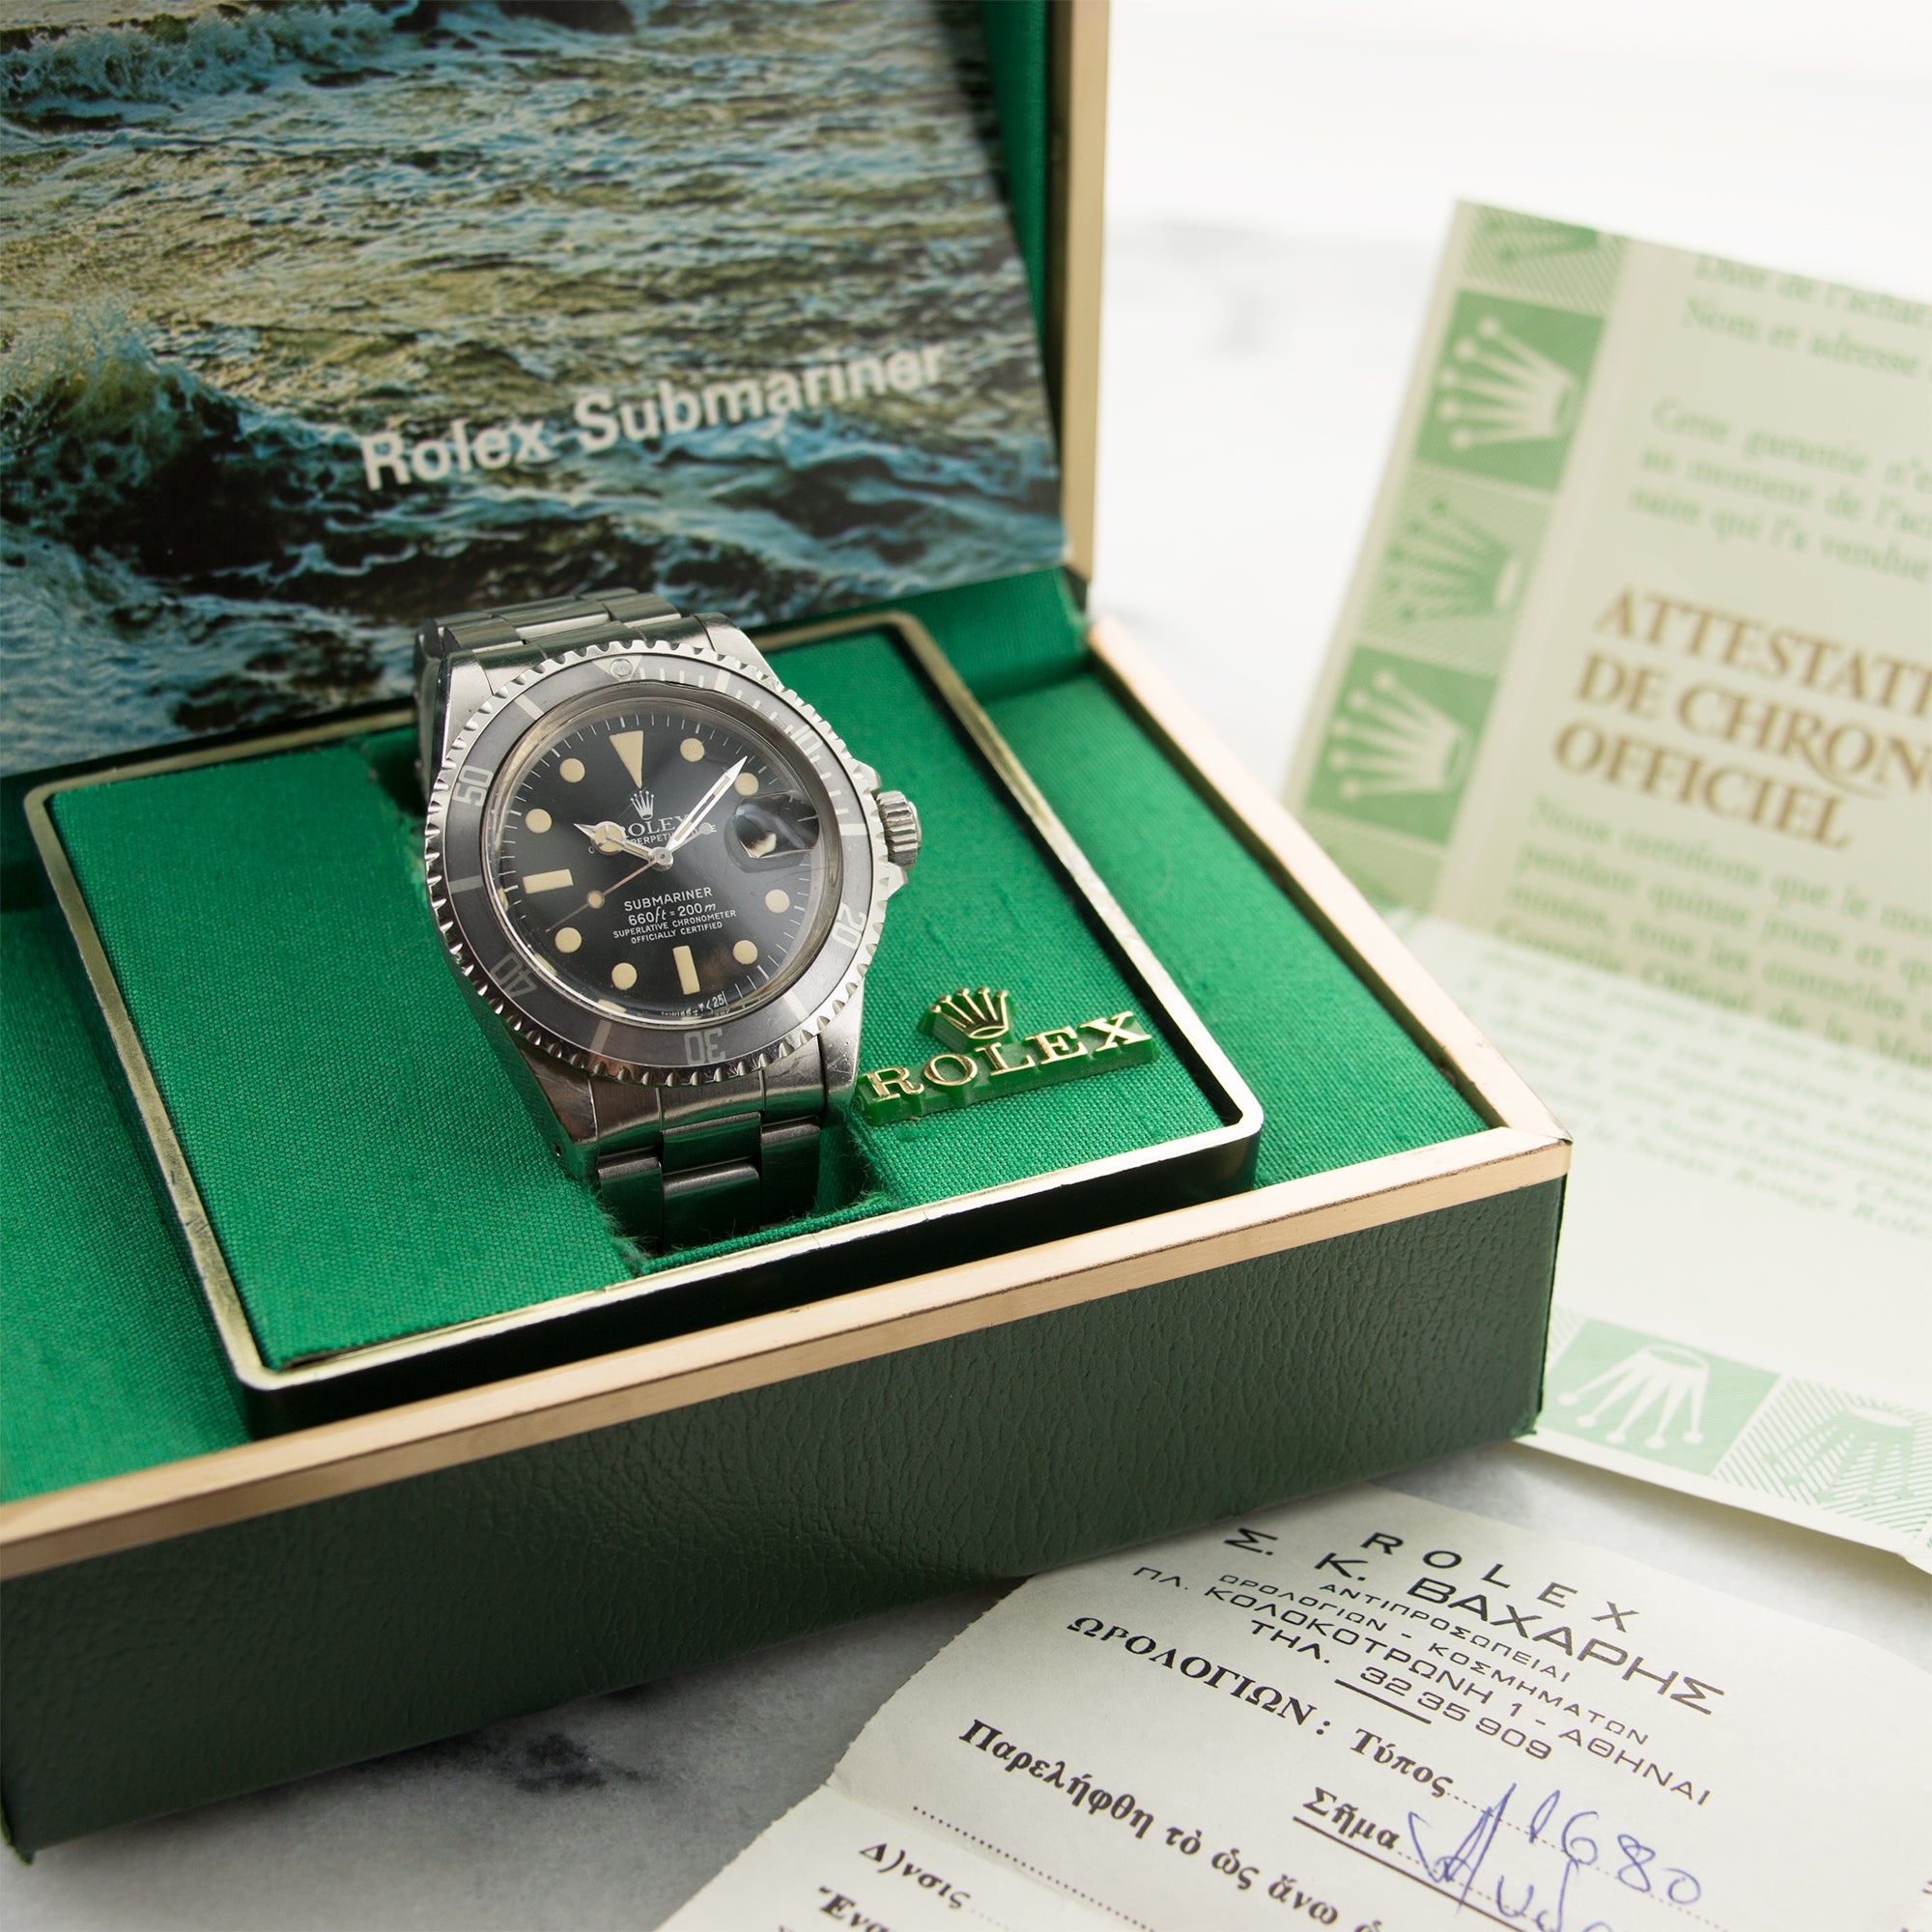 Rolex - Vintage Rolex Submariner Watch Ref. 1680 with Box & Papers - The Keystone Watches